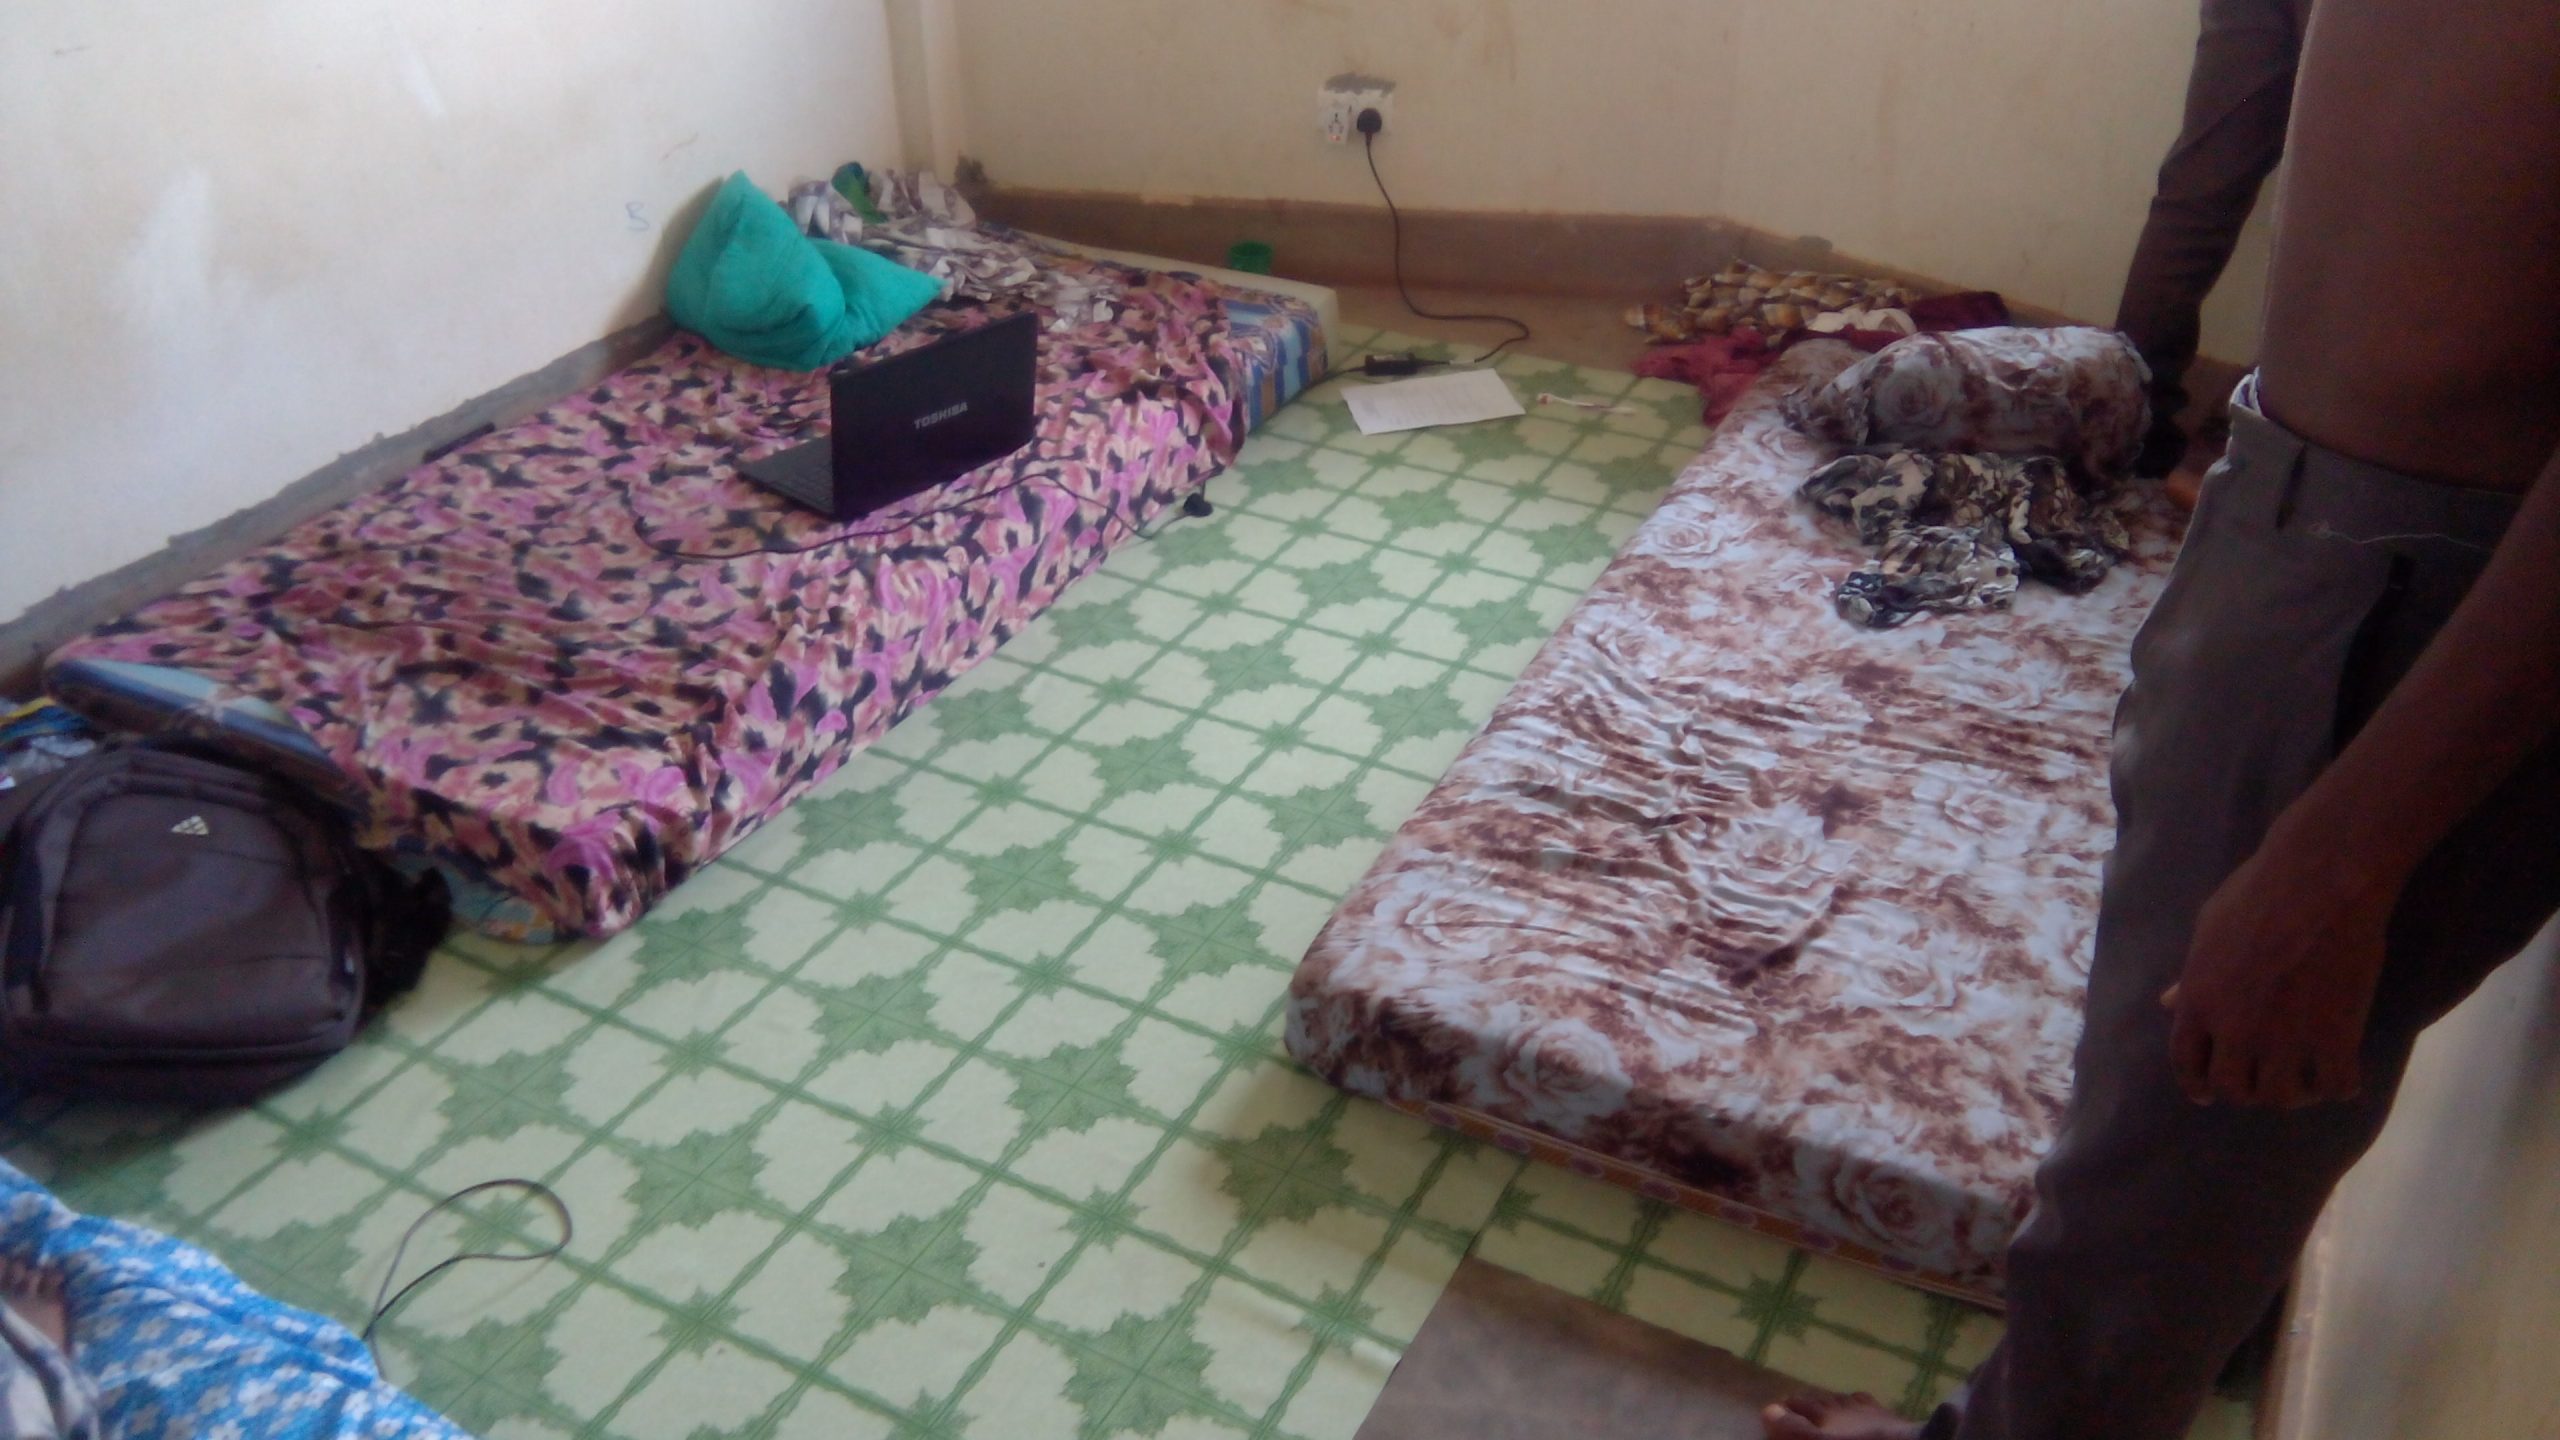 One of the rooms with mattresses on the floor.